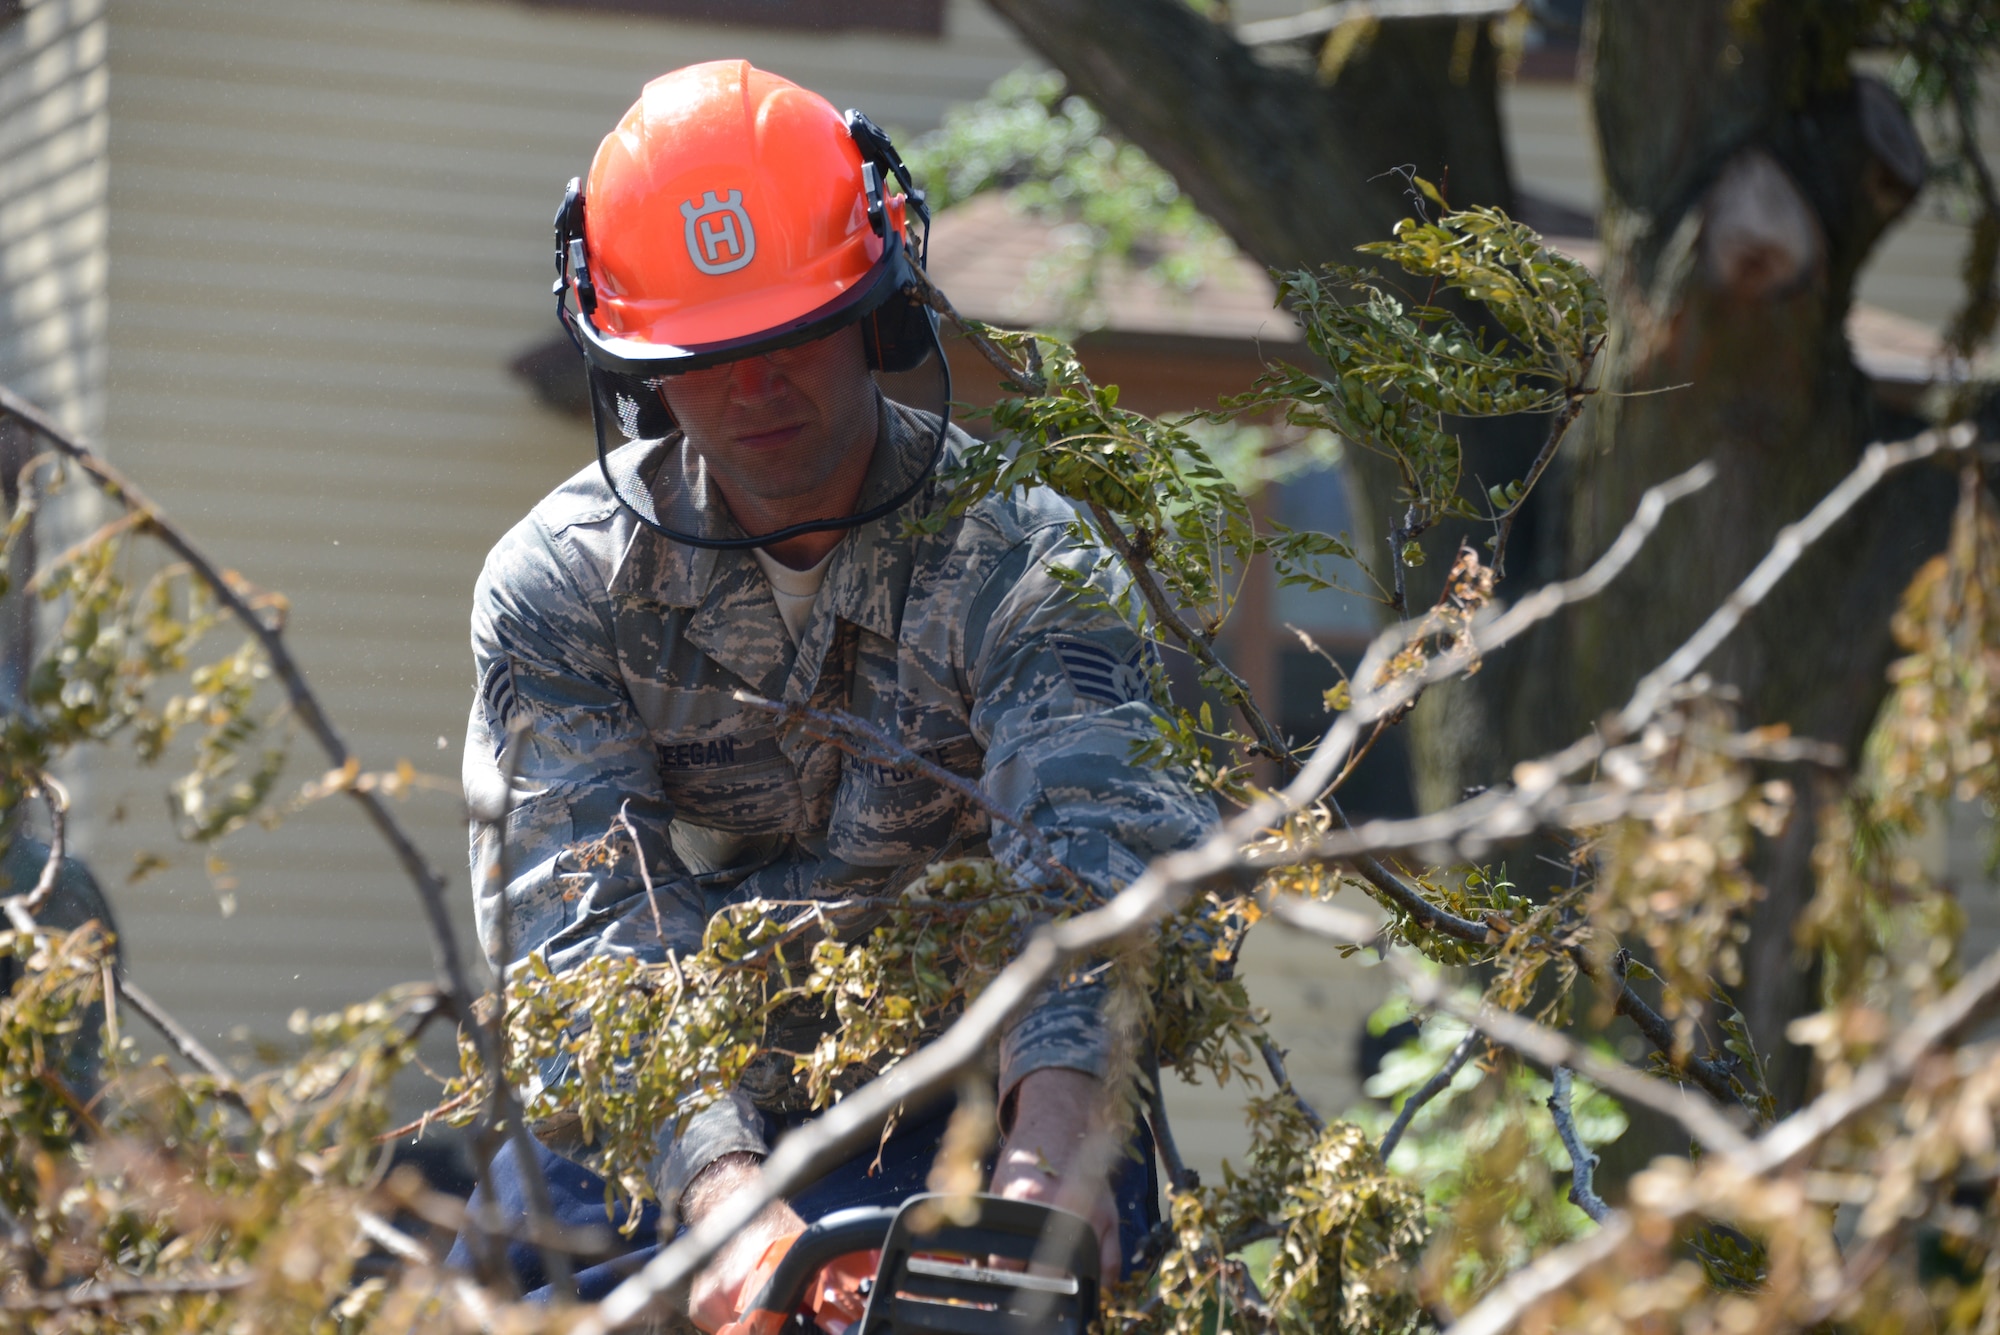 Staff Sgt. Jerad Keegan, 185th Air Refueling Wing Civil Engineering Squadron, Iowa Air National Guard, uses a chain saw to clear downed trees in Cedar Rapids, Iowa, Aug. 18, 2020. Extremely high winds uprooted trees and caused widespread structural damage and power outages throughout Southeast Iowa.